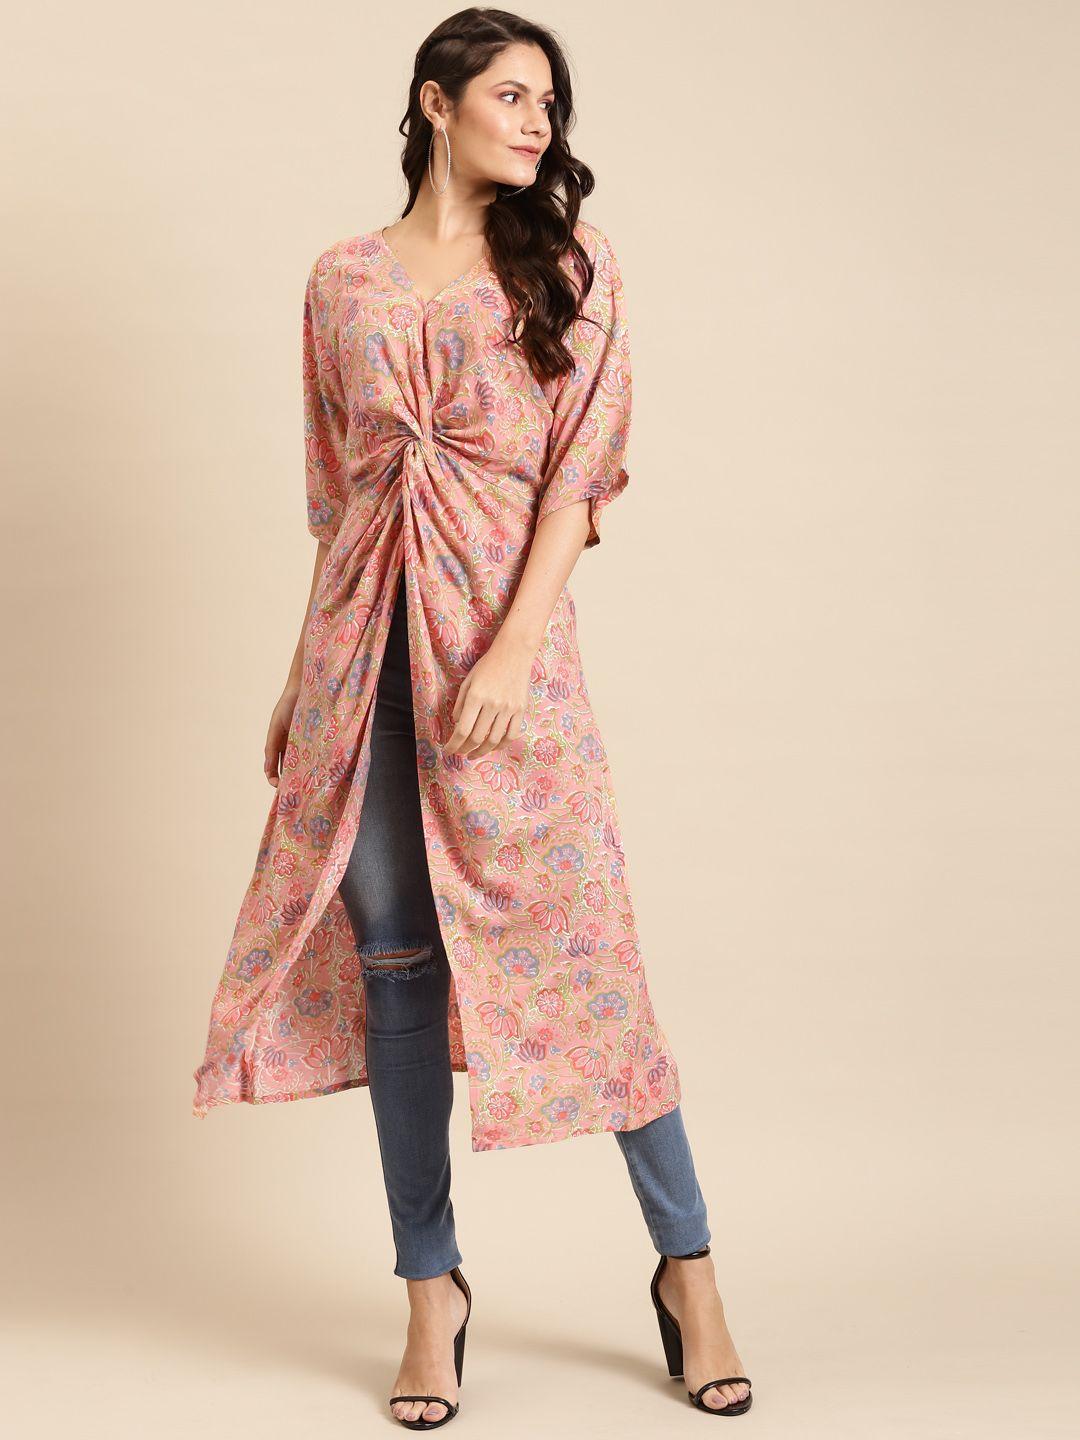 mabish by sonal jain peach-coloured & blue floral print twisted longlinetop